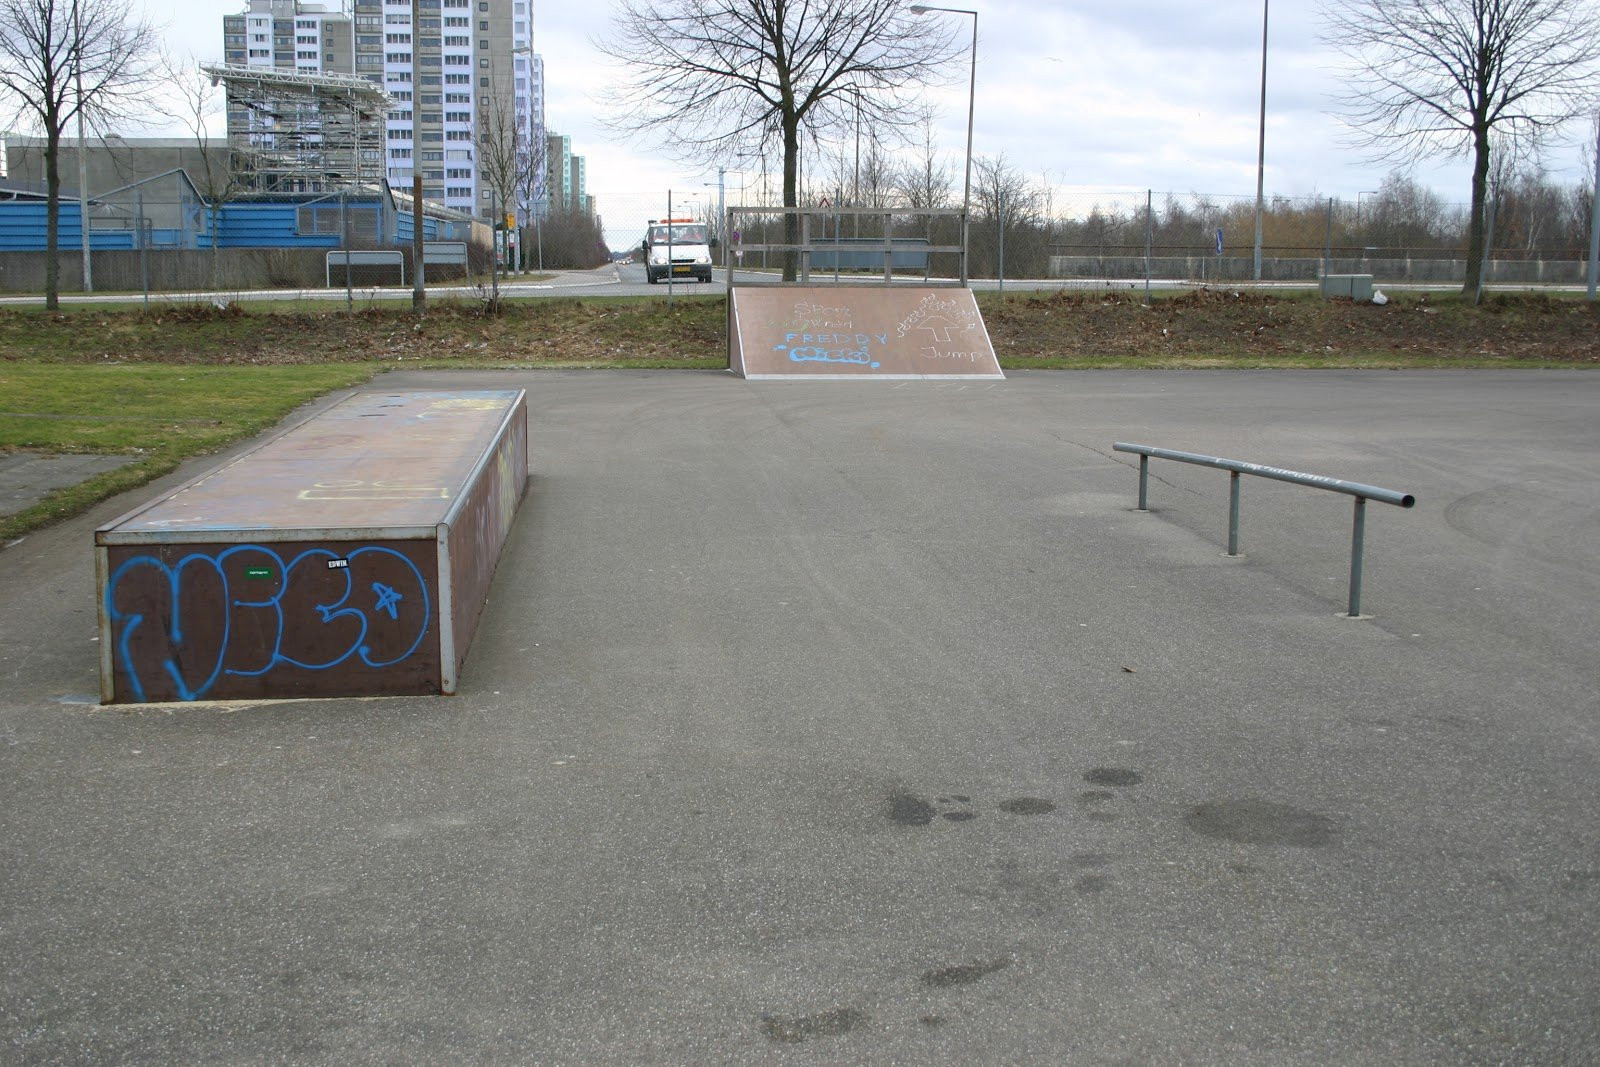 A rather large skating course with various obstacles. The park has a foundation of asphalt and there is an appropriate distance between the ramps. There is a large and a small bank, a quarter, a fun box, a pyramid and a couple of different rails. Curbs/ledges in different sizes and a movable manual pad. It is possible to buy food and beverages at a kiosk which is about 5-10 minutes away. The nearest station is Vallensbæk, which is walking distance from the park (about 15 minutes). You will have everything you need at the park, however, it does not offer many opportunities for creative lines. Therefore, park is recommended for beginners, however, more experienced skaters should not go out of their way to visit the park.